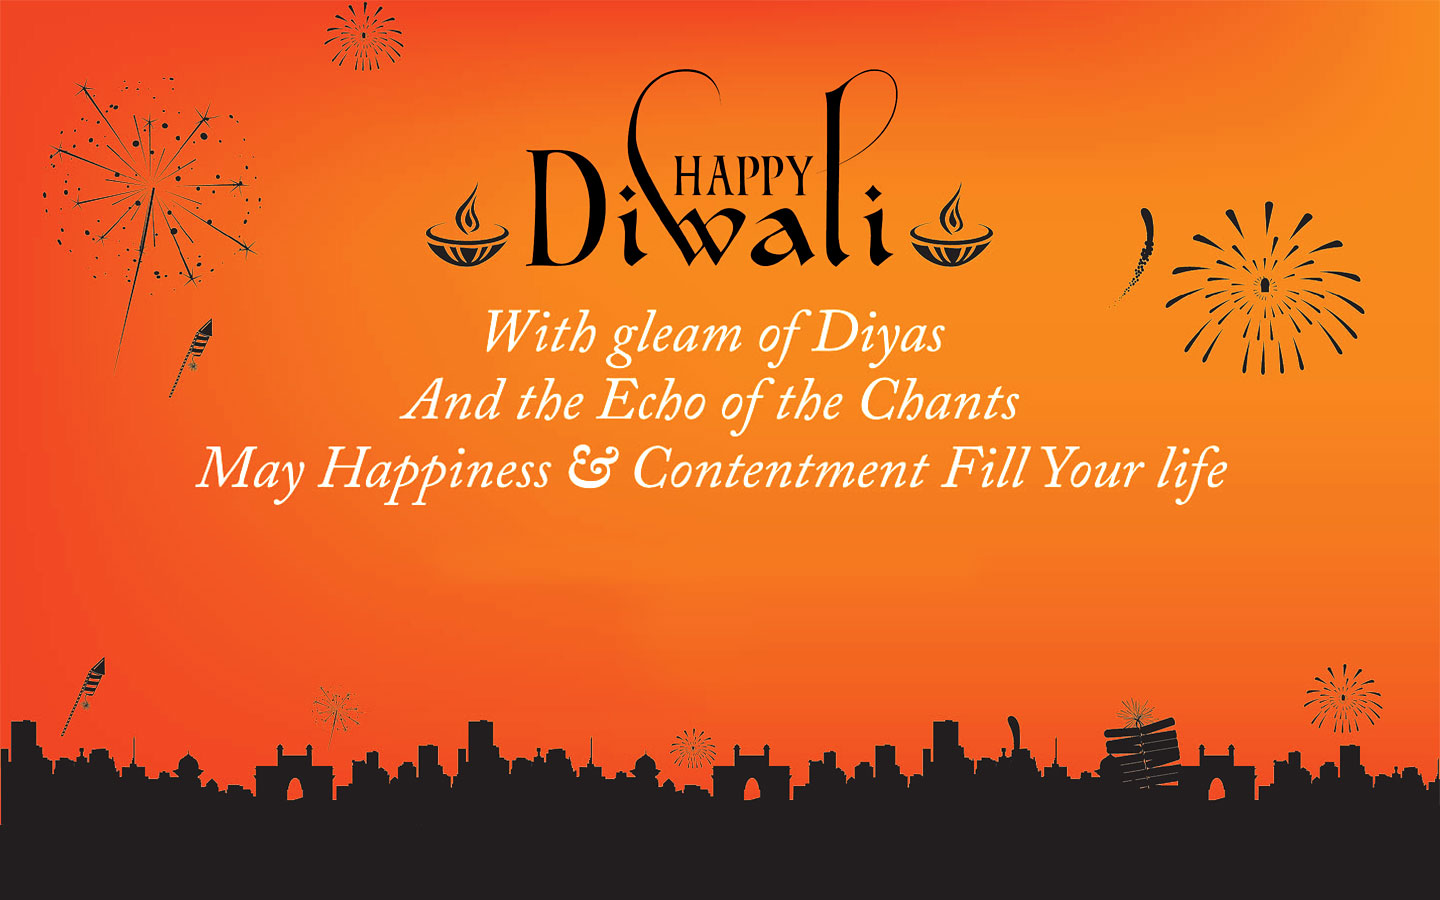 61 Diwali Wallpapers, Images and Pictures for Free Download in HD